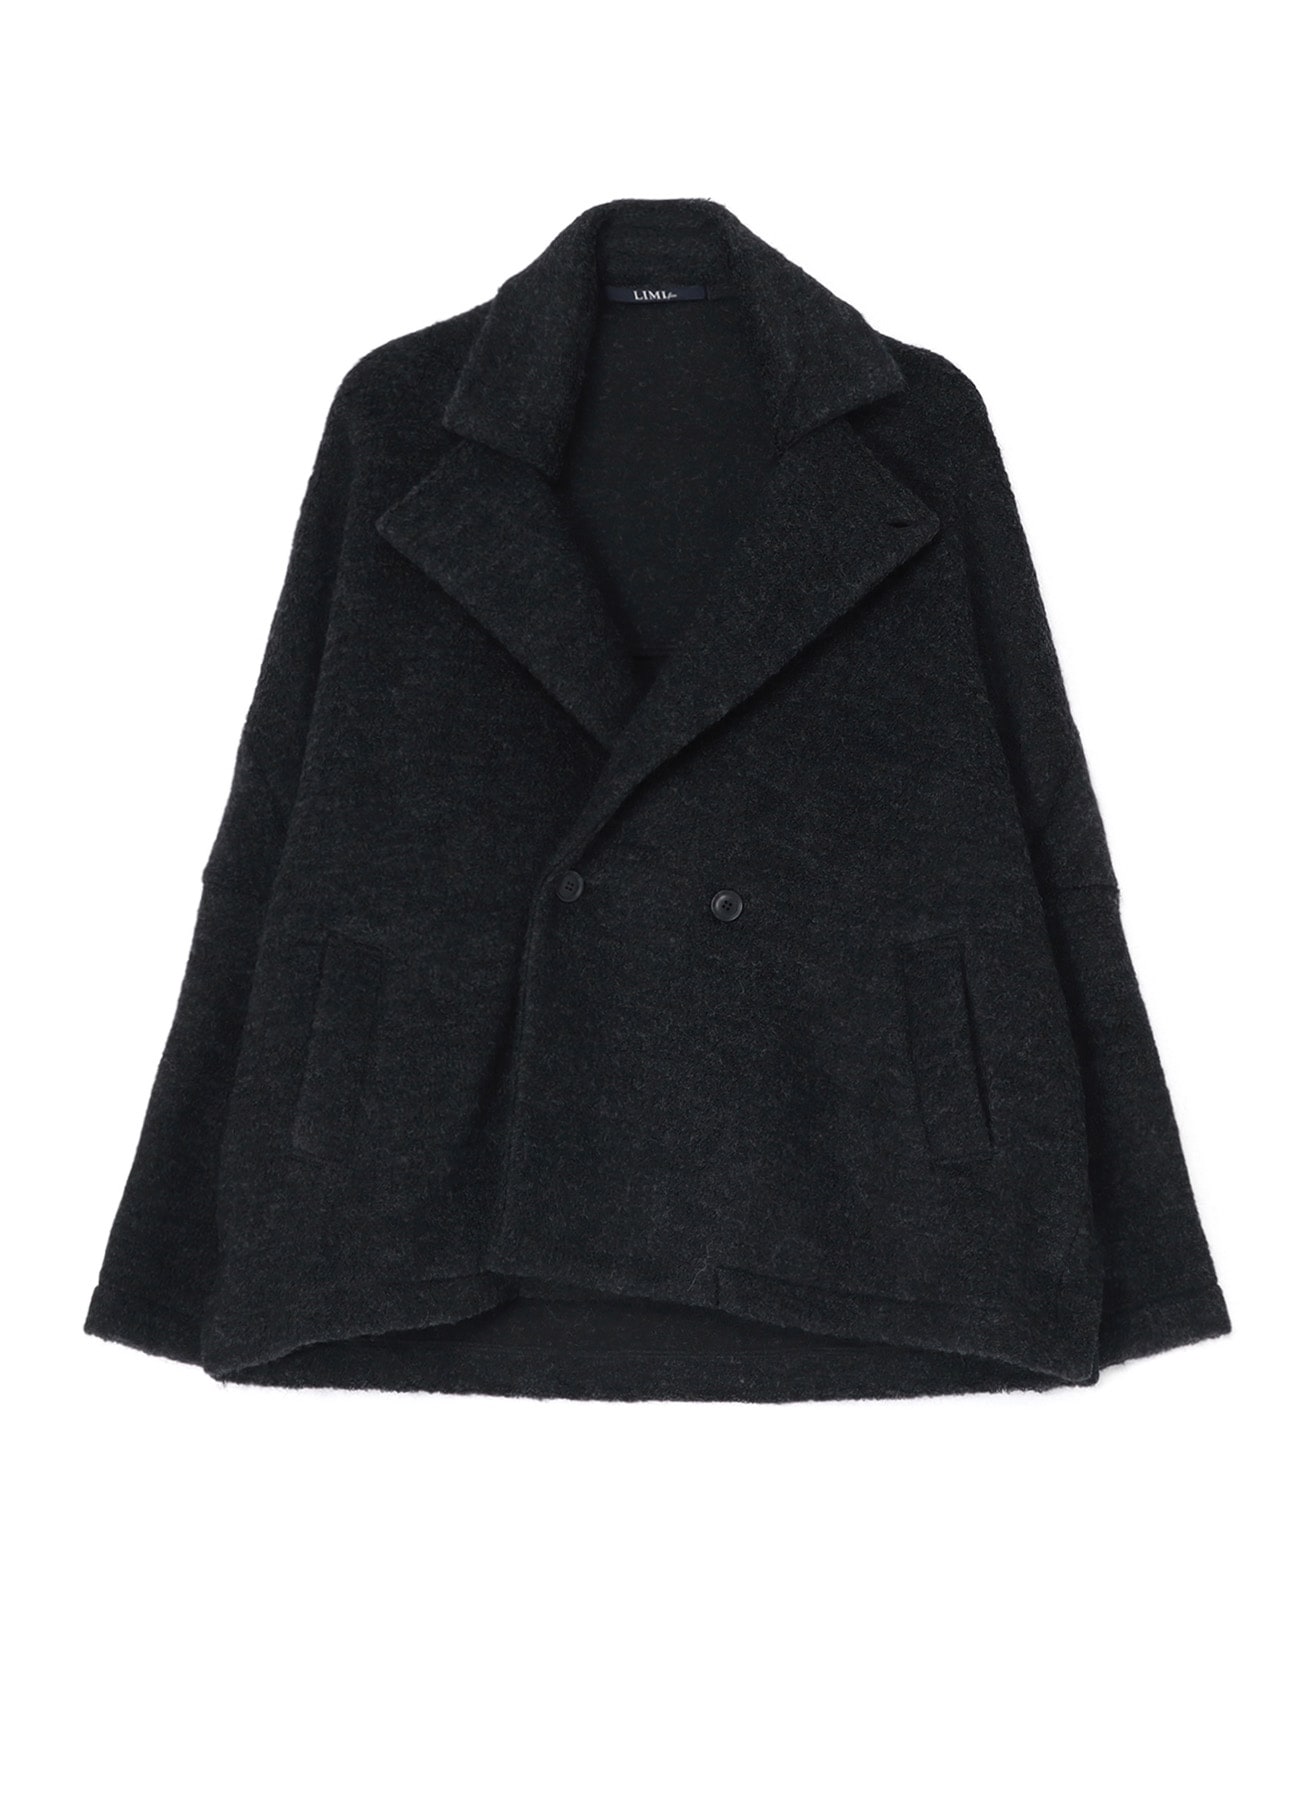 SHEEP PILE JACKET WITH DOUBLE FRONT BUTTON